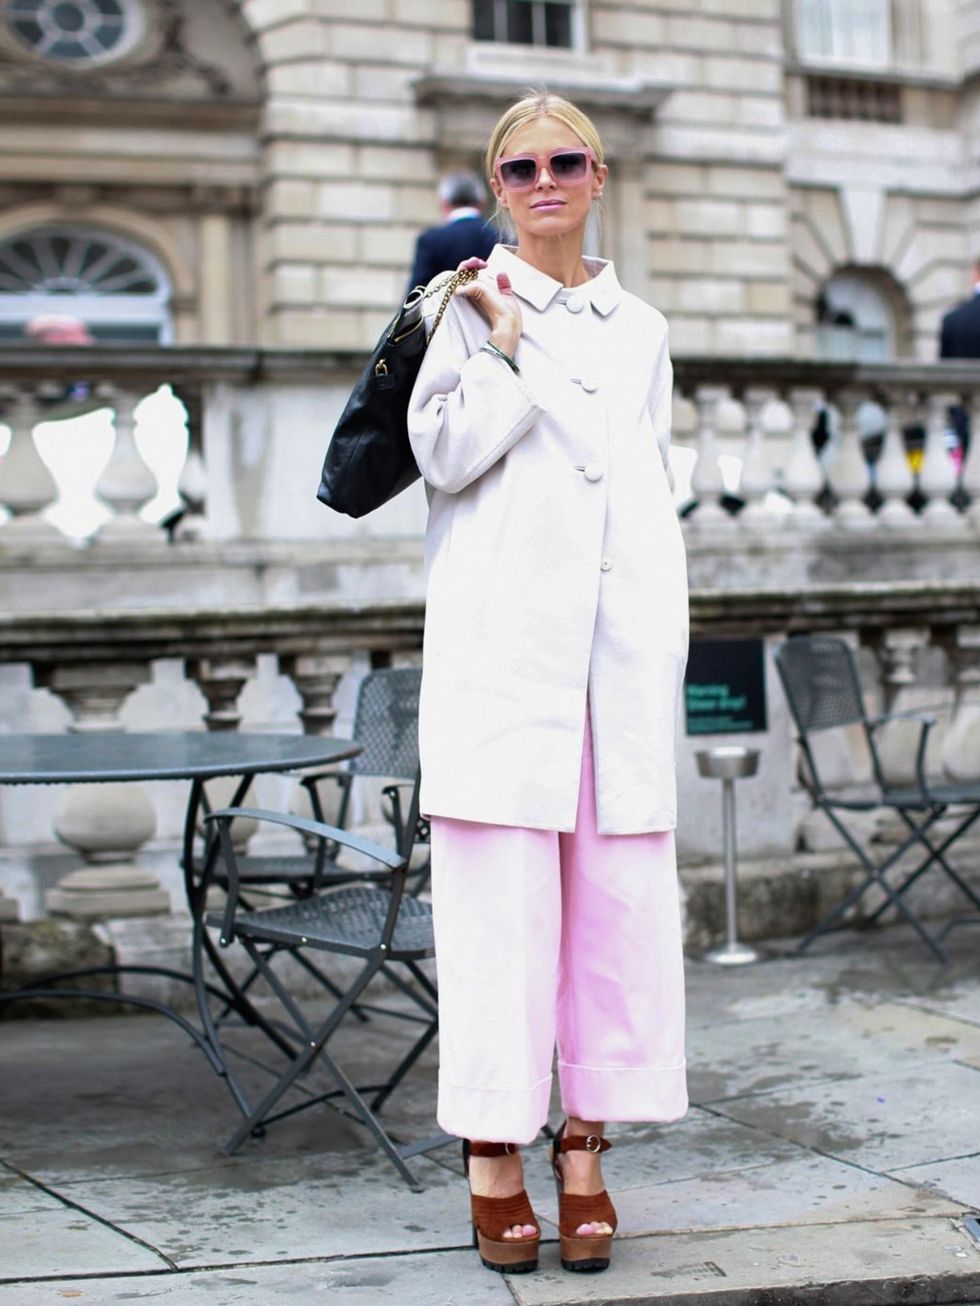 <p><strong>LONDON</strong></p><p>Laura Bailey wears Simone Rocha, Celine sunglasses and Sister by Sibling shoes.</p><p><a href="http://www.elleuk.com/style/street-style/new-york-fashion-week-street-style2">NYFW Street Style</a></p><p><a href="http://www.e